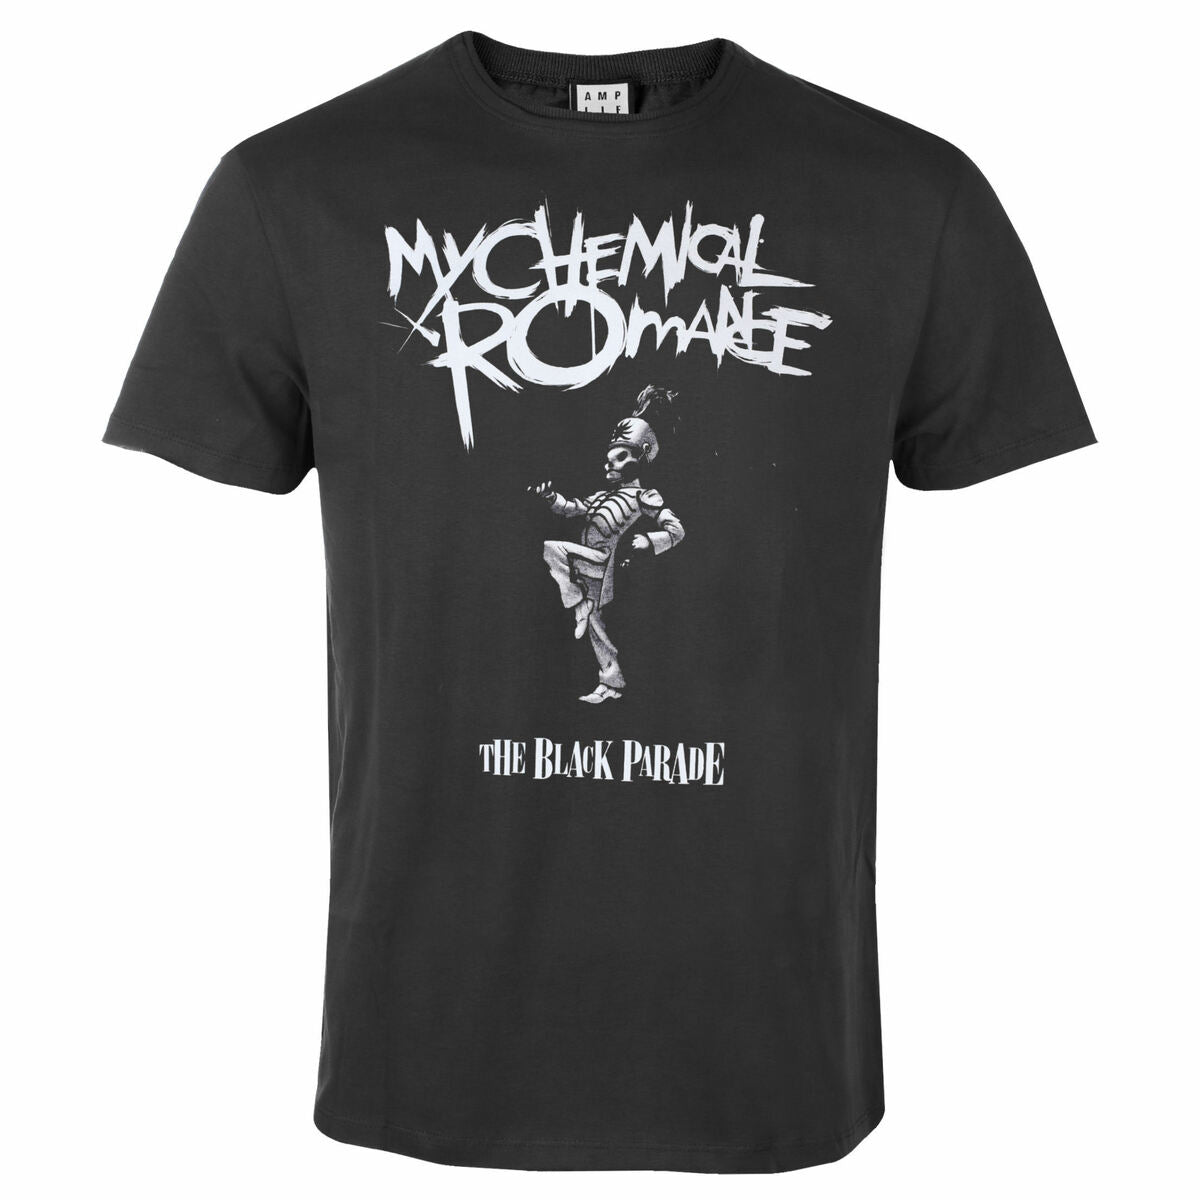 My Chemical Romance - Black Parade Tee (Amplified)